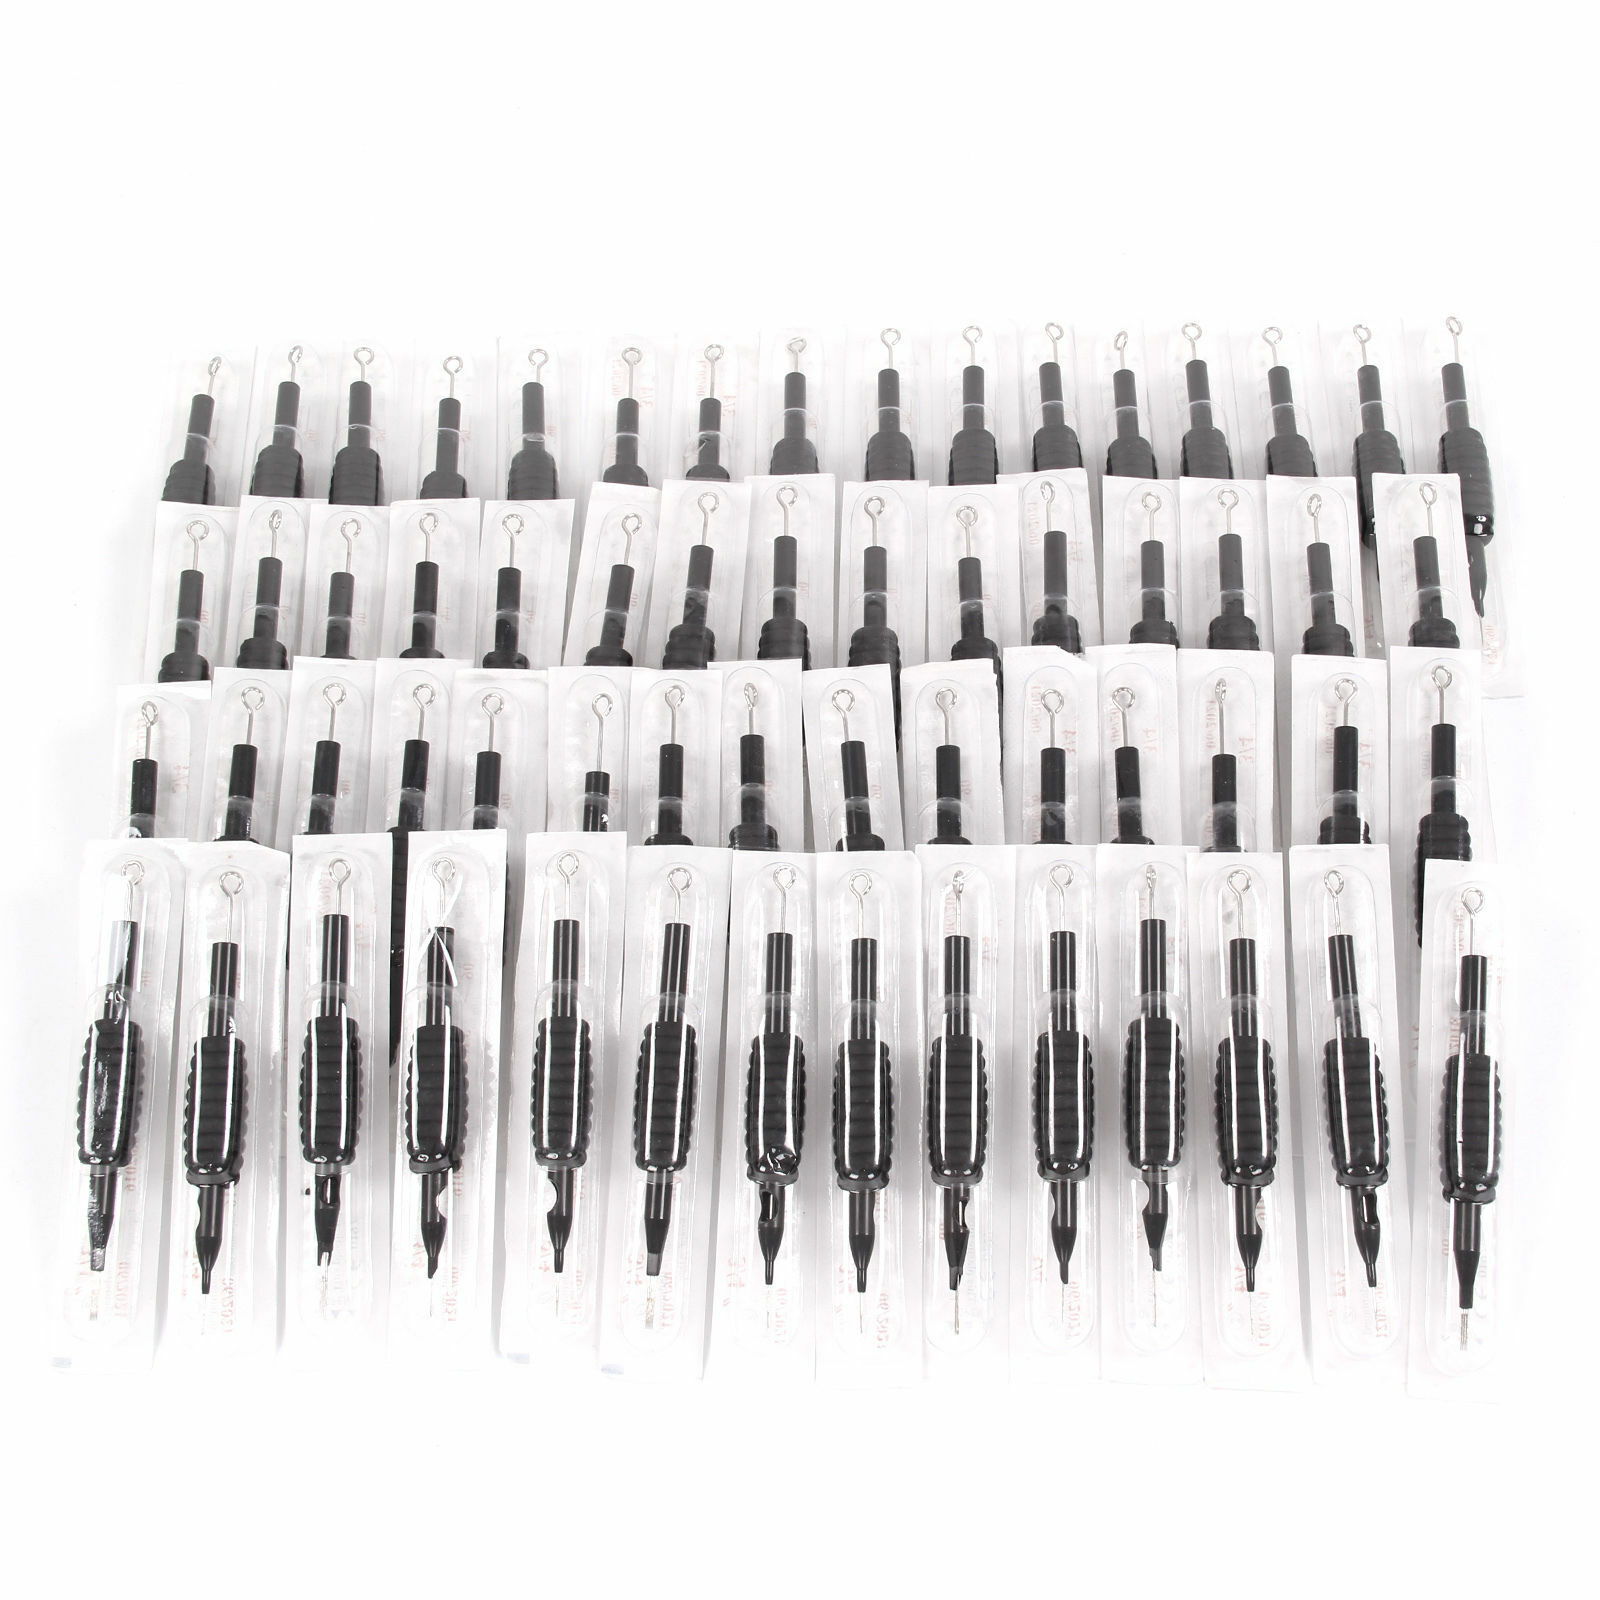 60*Disposable Tattoo Sterilized Needles Mixed Assorted with Tube 3/4 Grip Tip Unbranded Does not apply - фотография #3